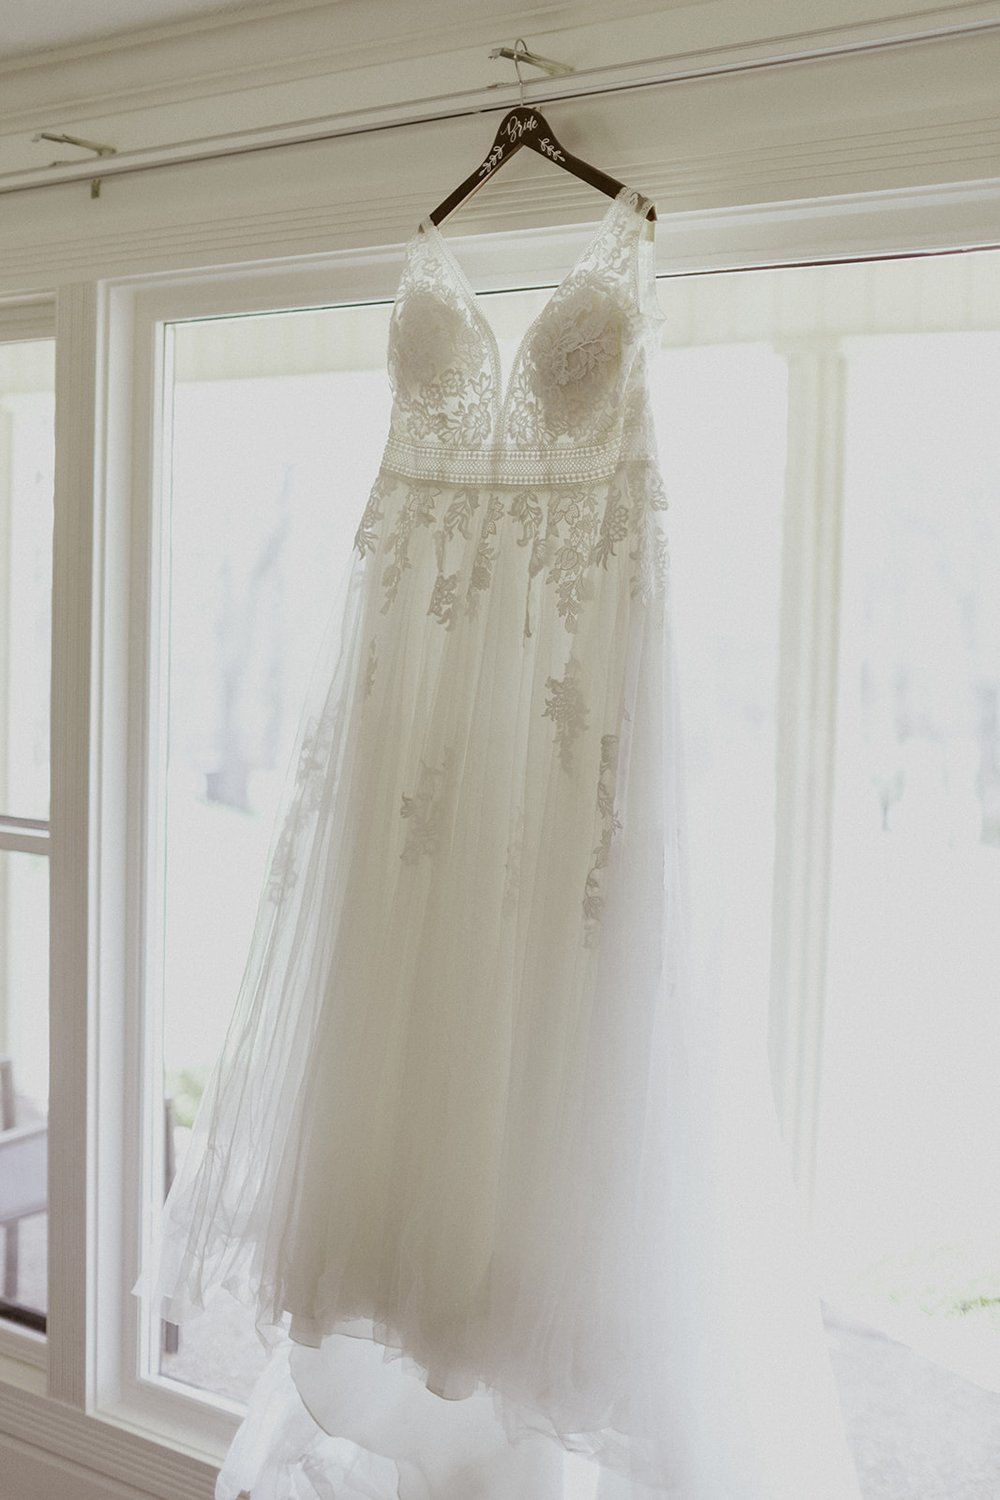 The wedding gown from David's Bridal